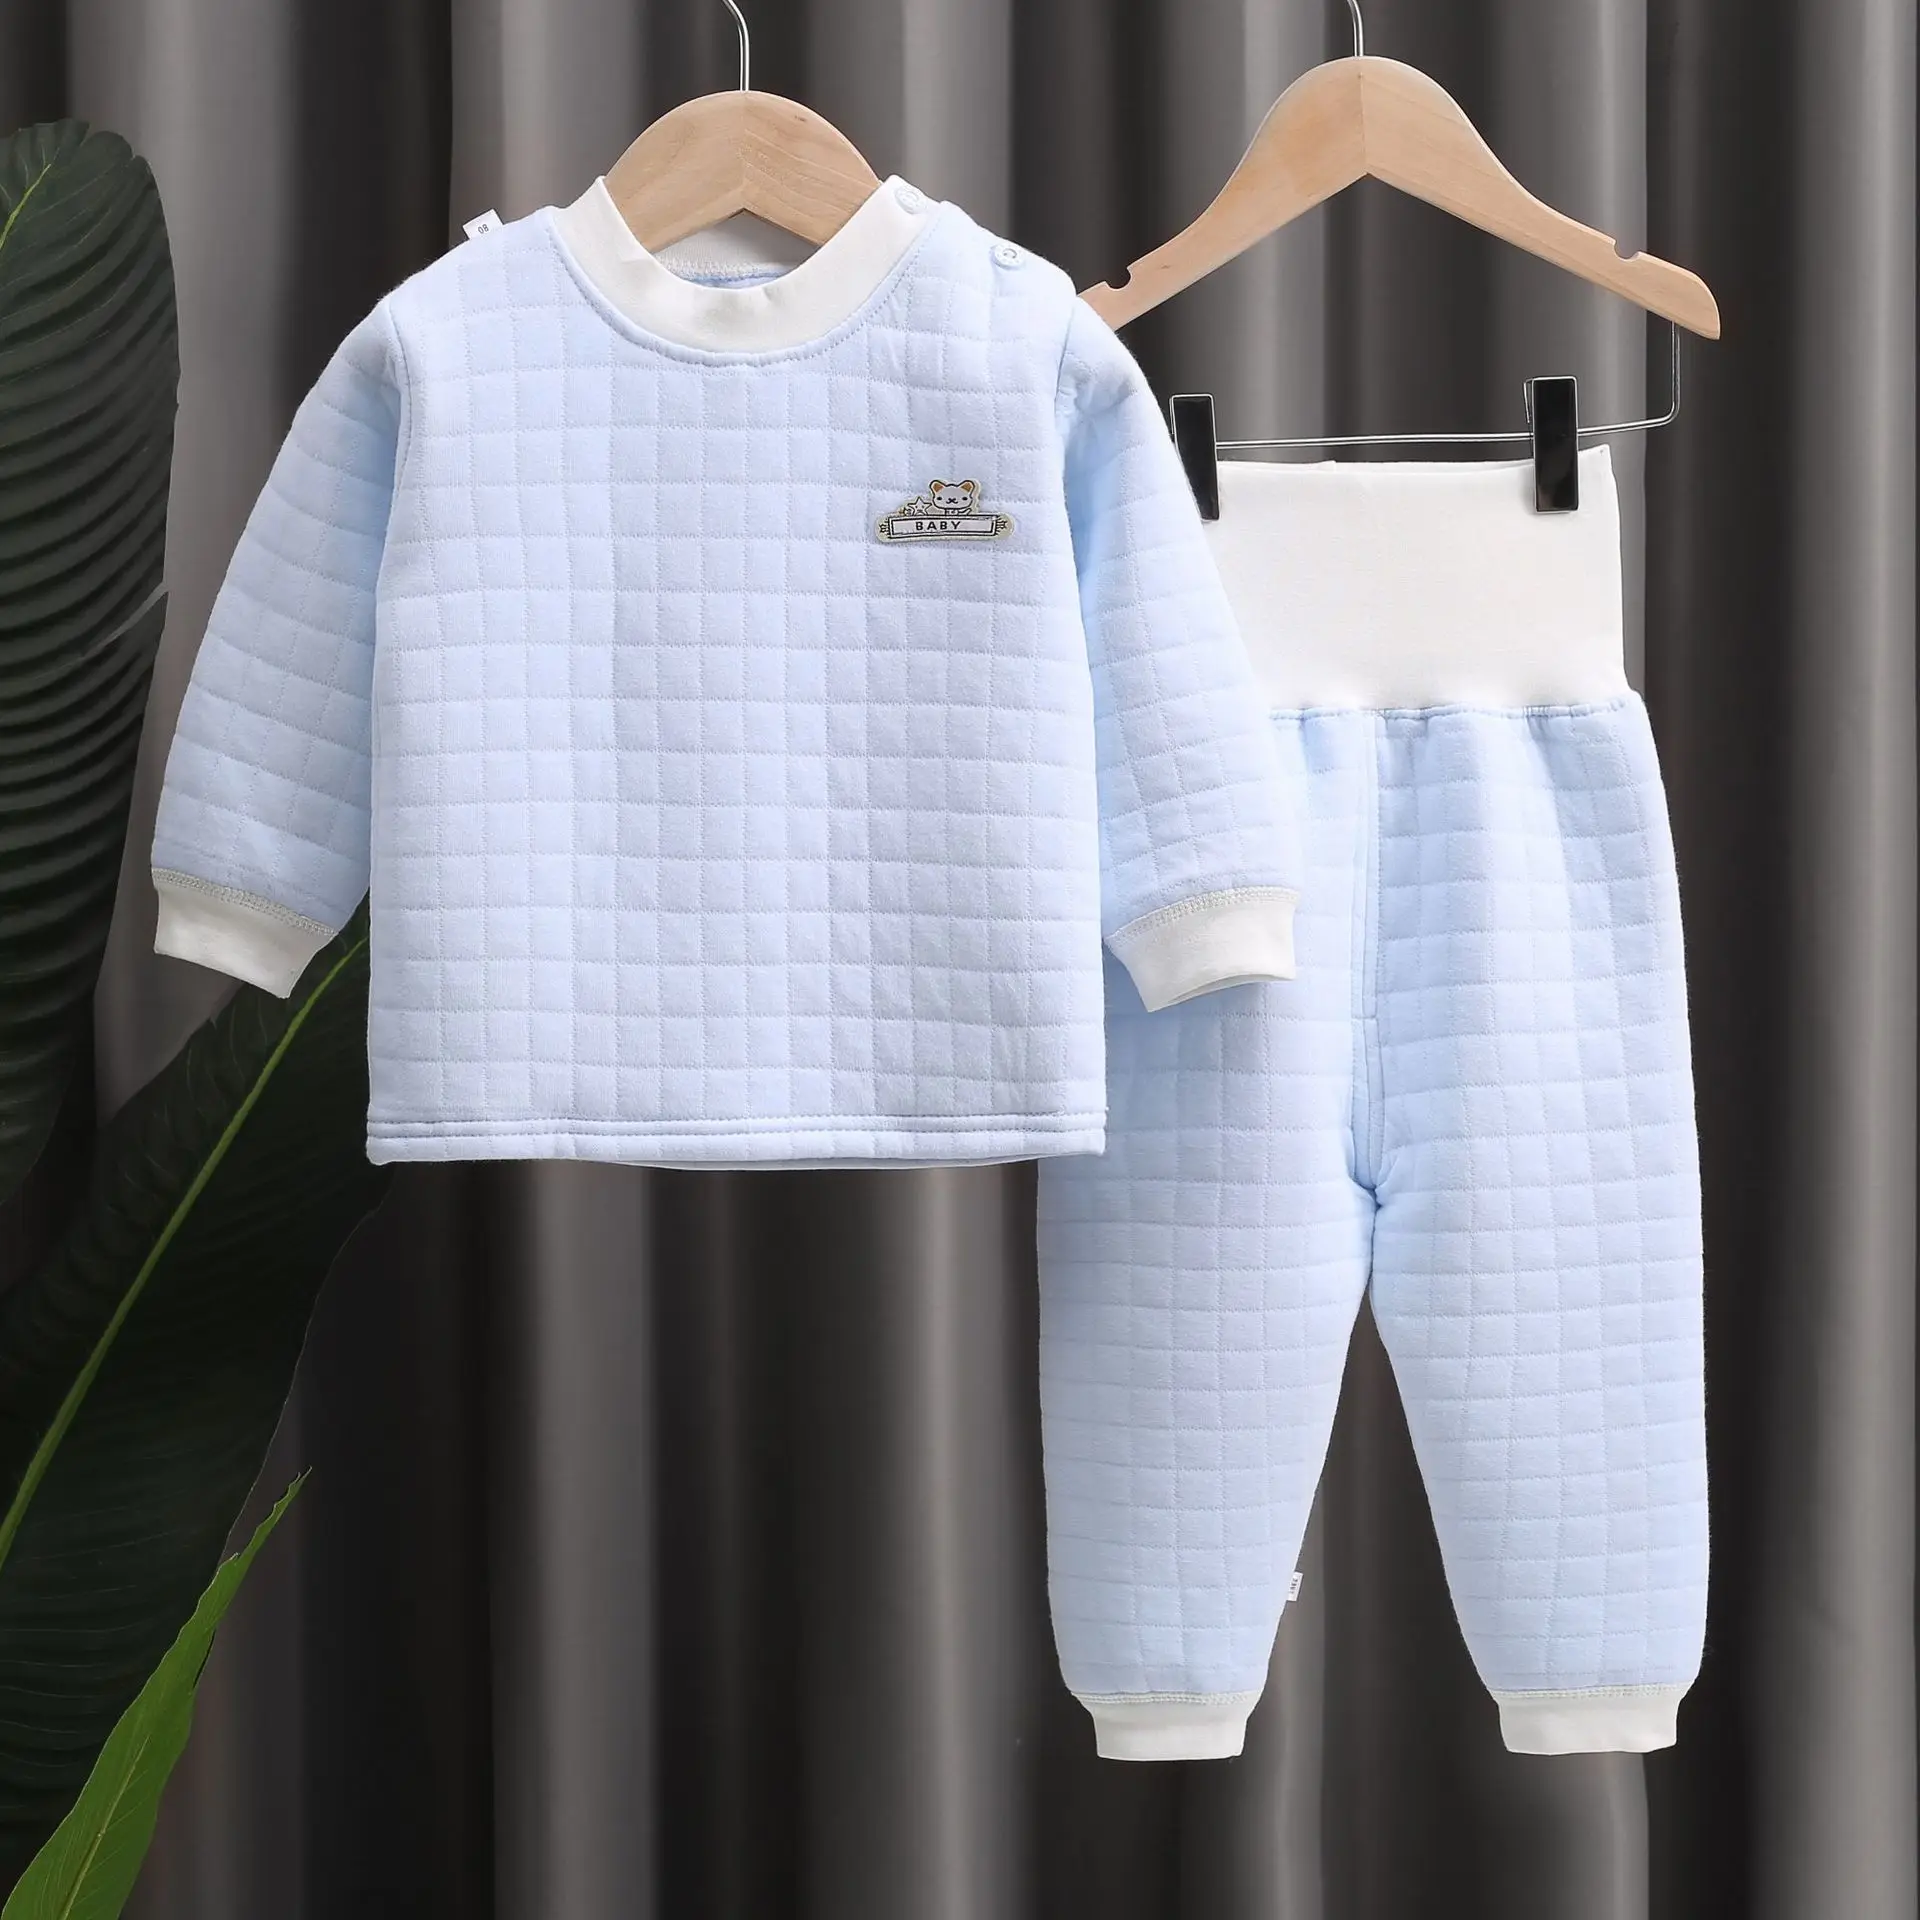 New Baby Boys Autumn Thicken Clothes Long Sleeved Three-layer Warm Underwear Suit High Waist Belly-protecting Cotton Pant Pajama cheap cotton nightgown Sleepwear & Robes